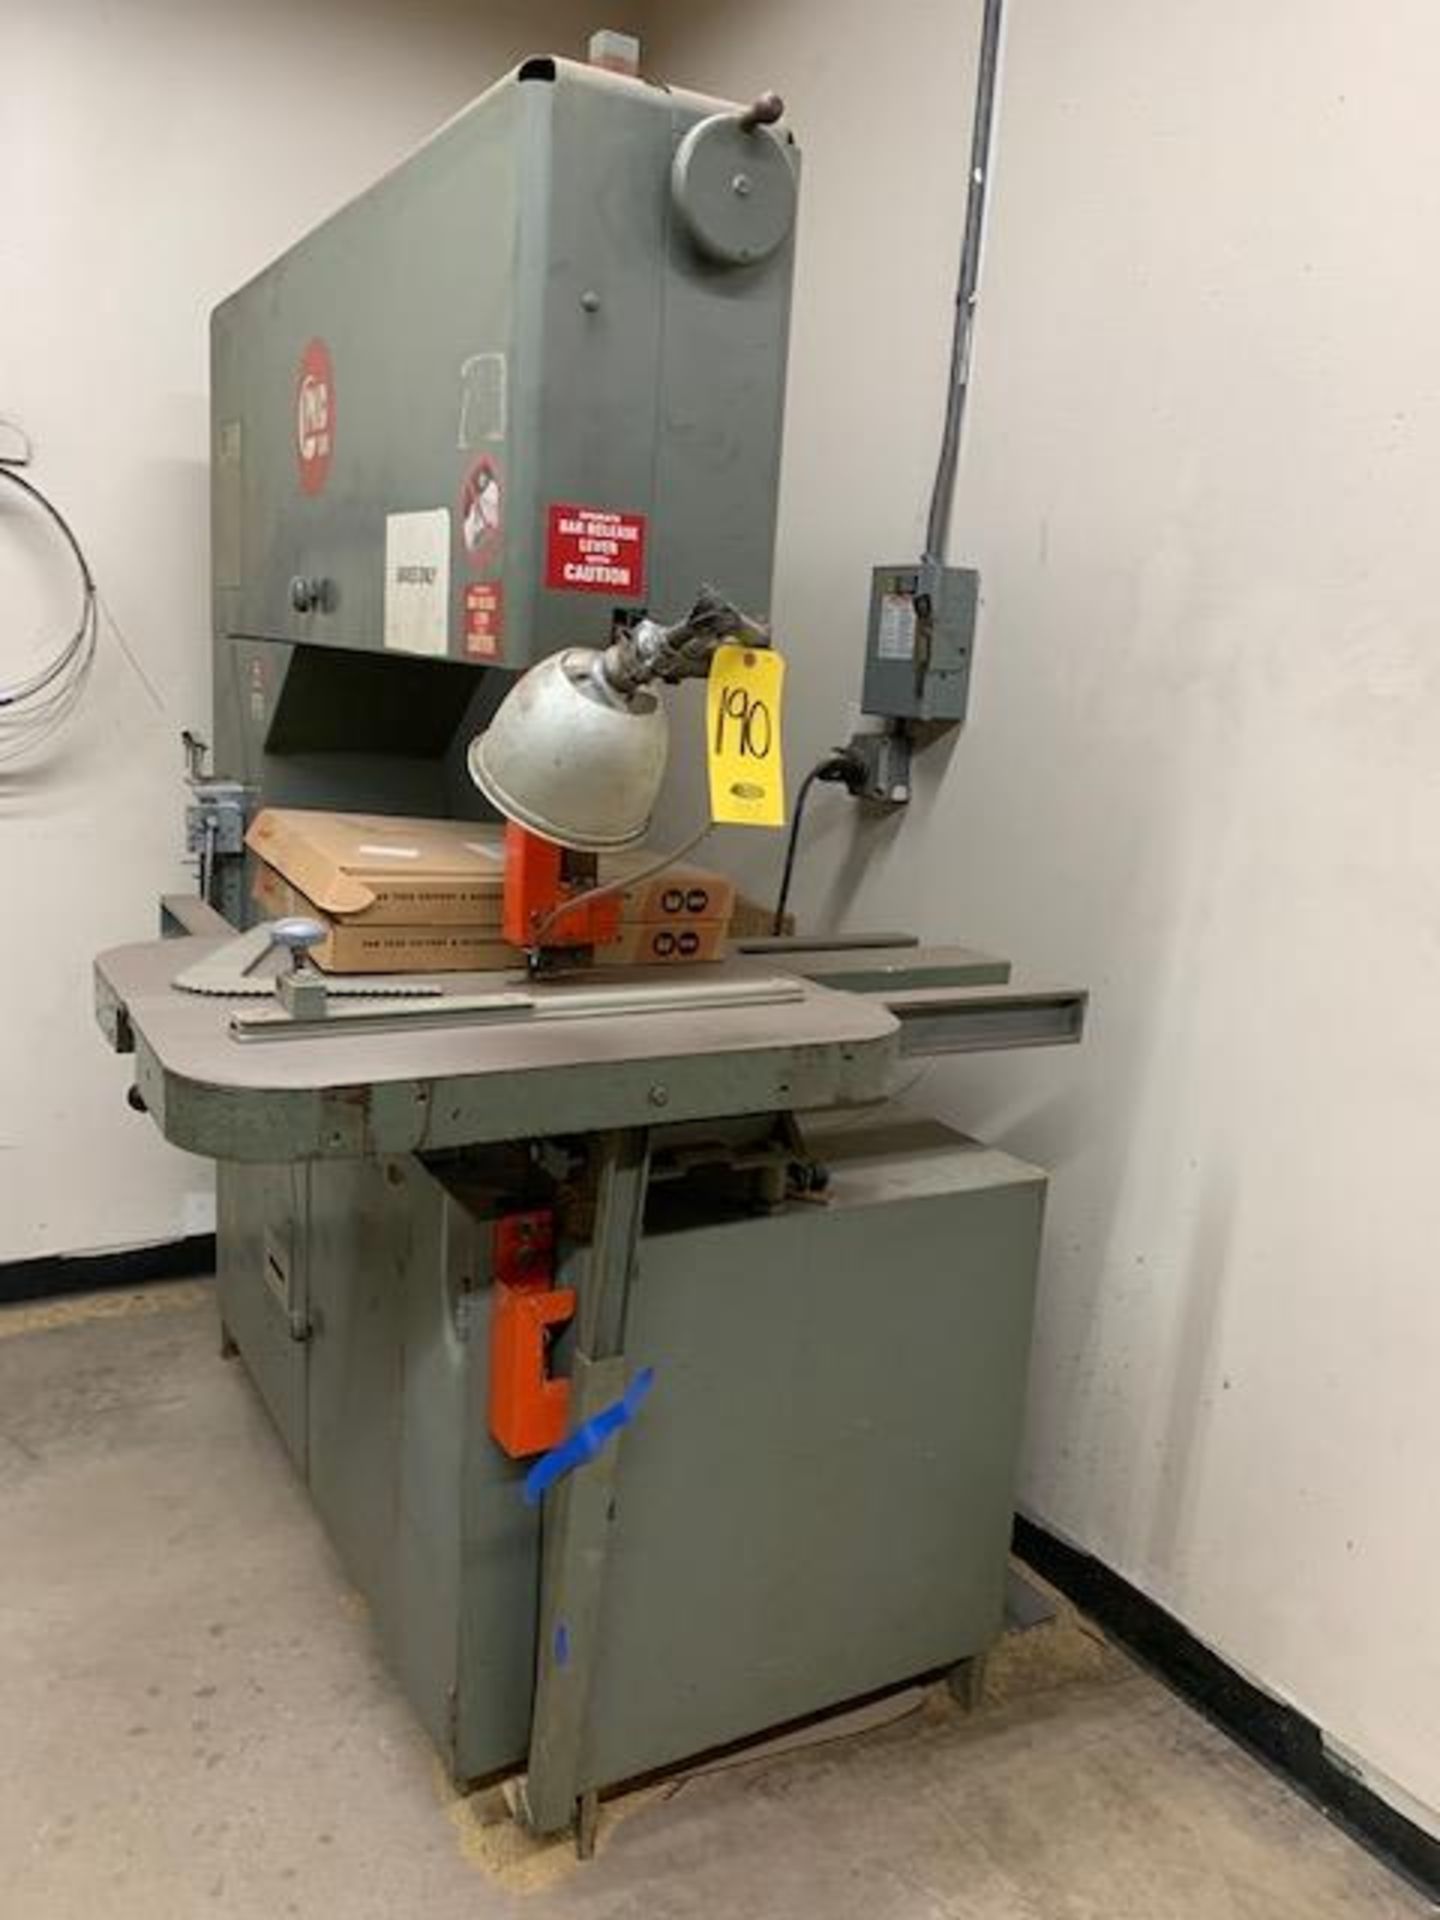 GROB 4V-36 VERTICAL BAND SAW, S/N 1652 (1986) 36 IN., RW-B BLADE WELDER/GRINDER, 24 IN. X 28 IN... - Image 5 of 10